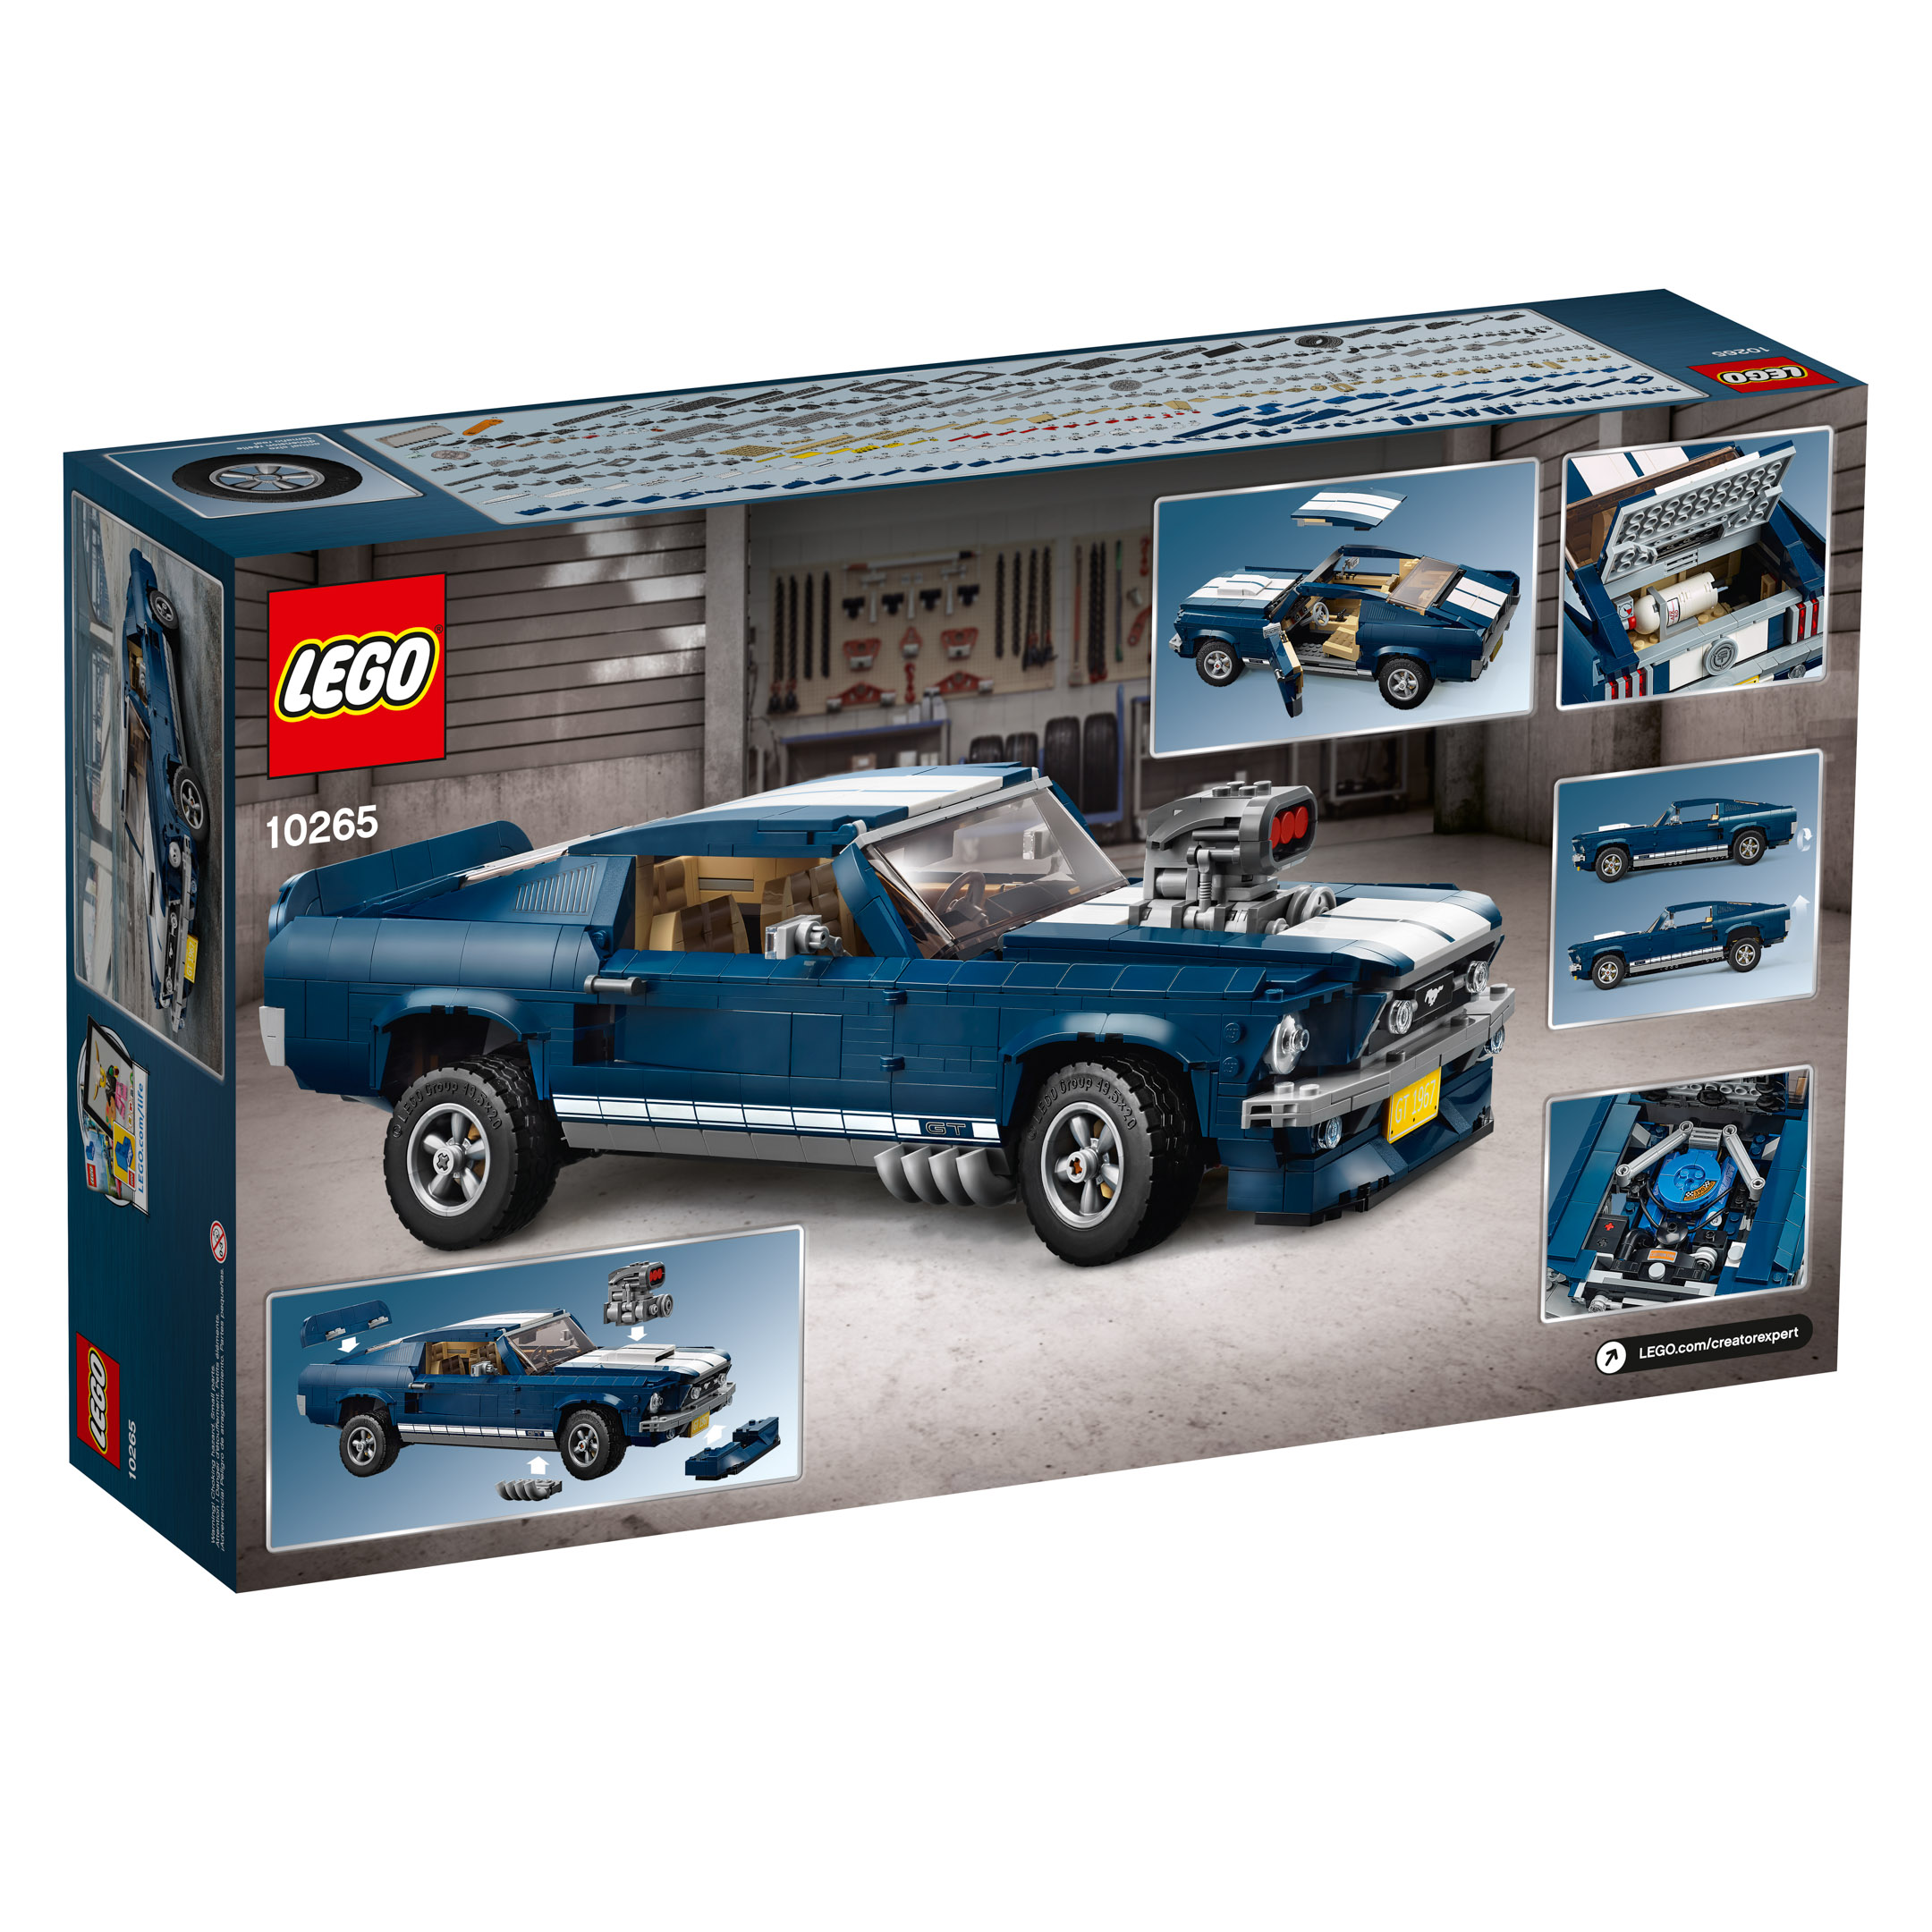 45410 10265 LEGO Creator Expert Ford Mustang 4